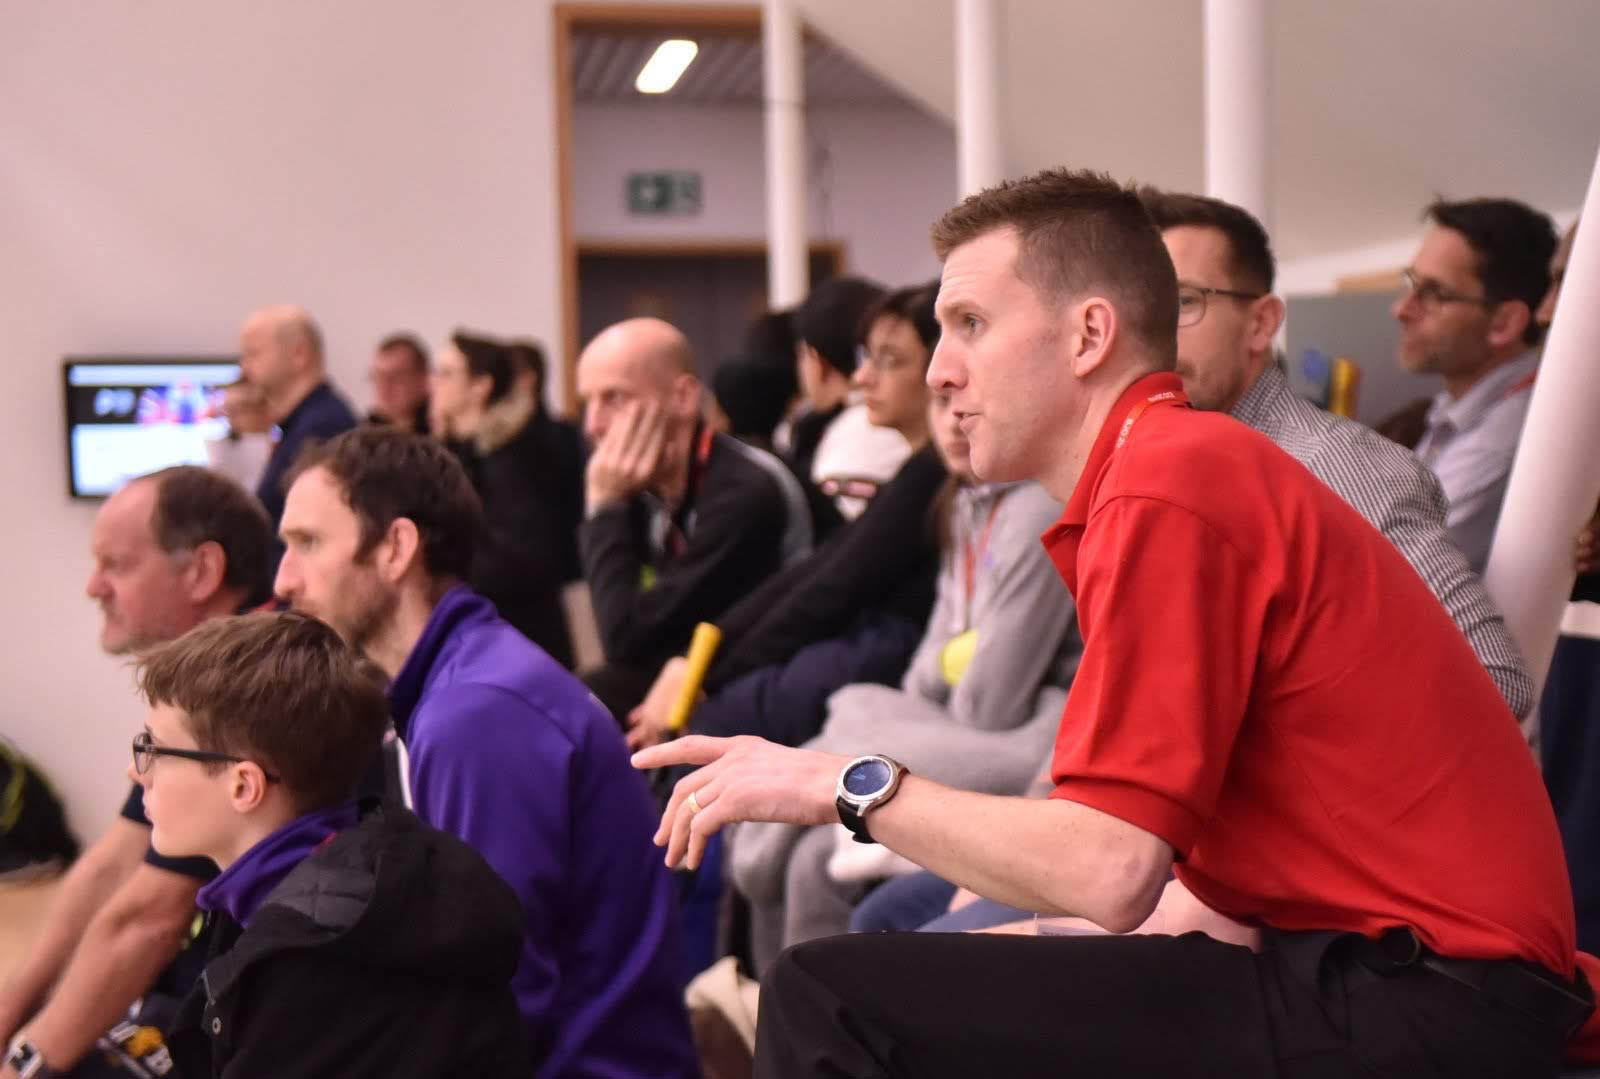 Image shows referee in the audience watching game.